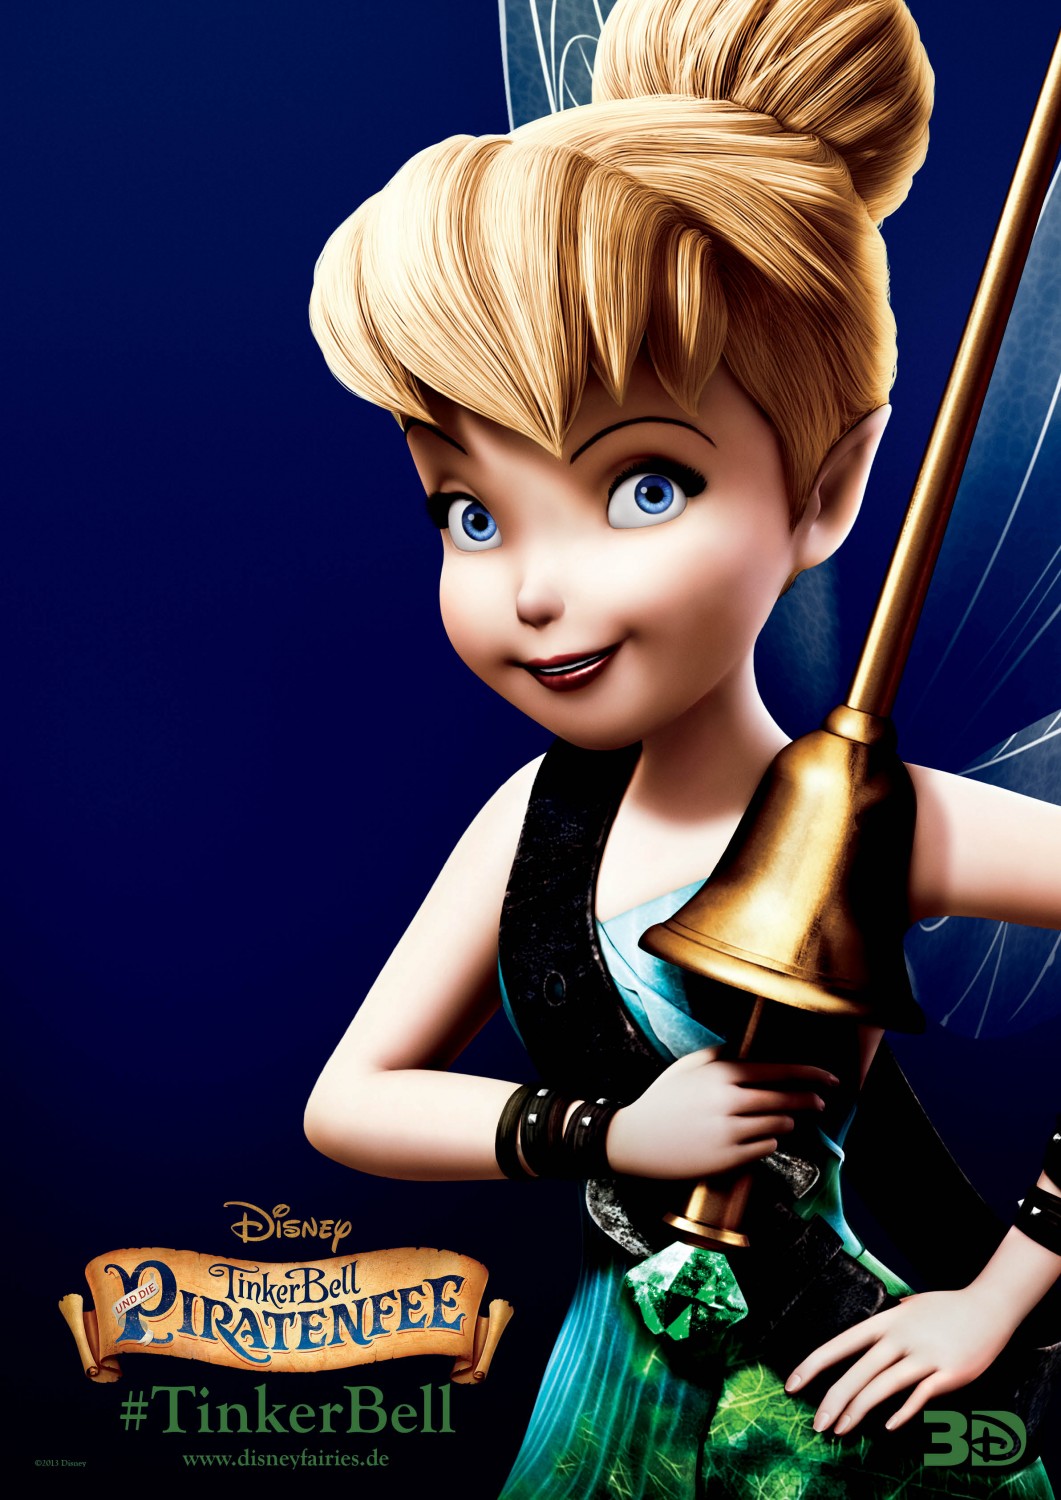 Extra Large Movie Poster Image for The Pirate Fairy (#2 of 6)